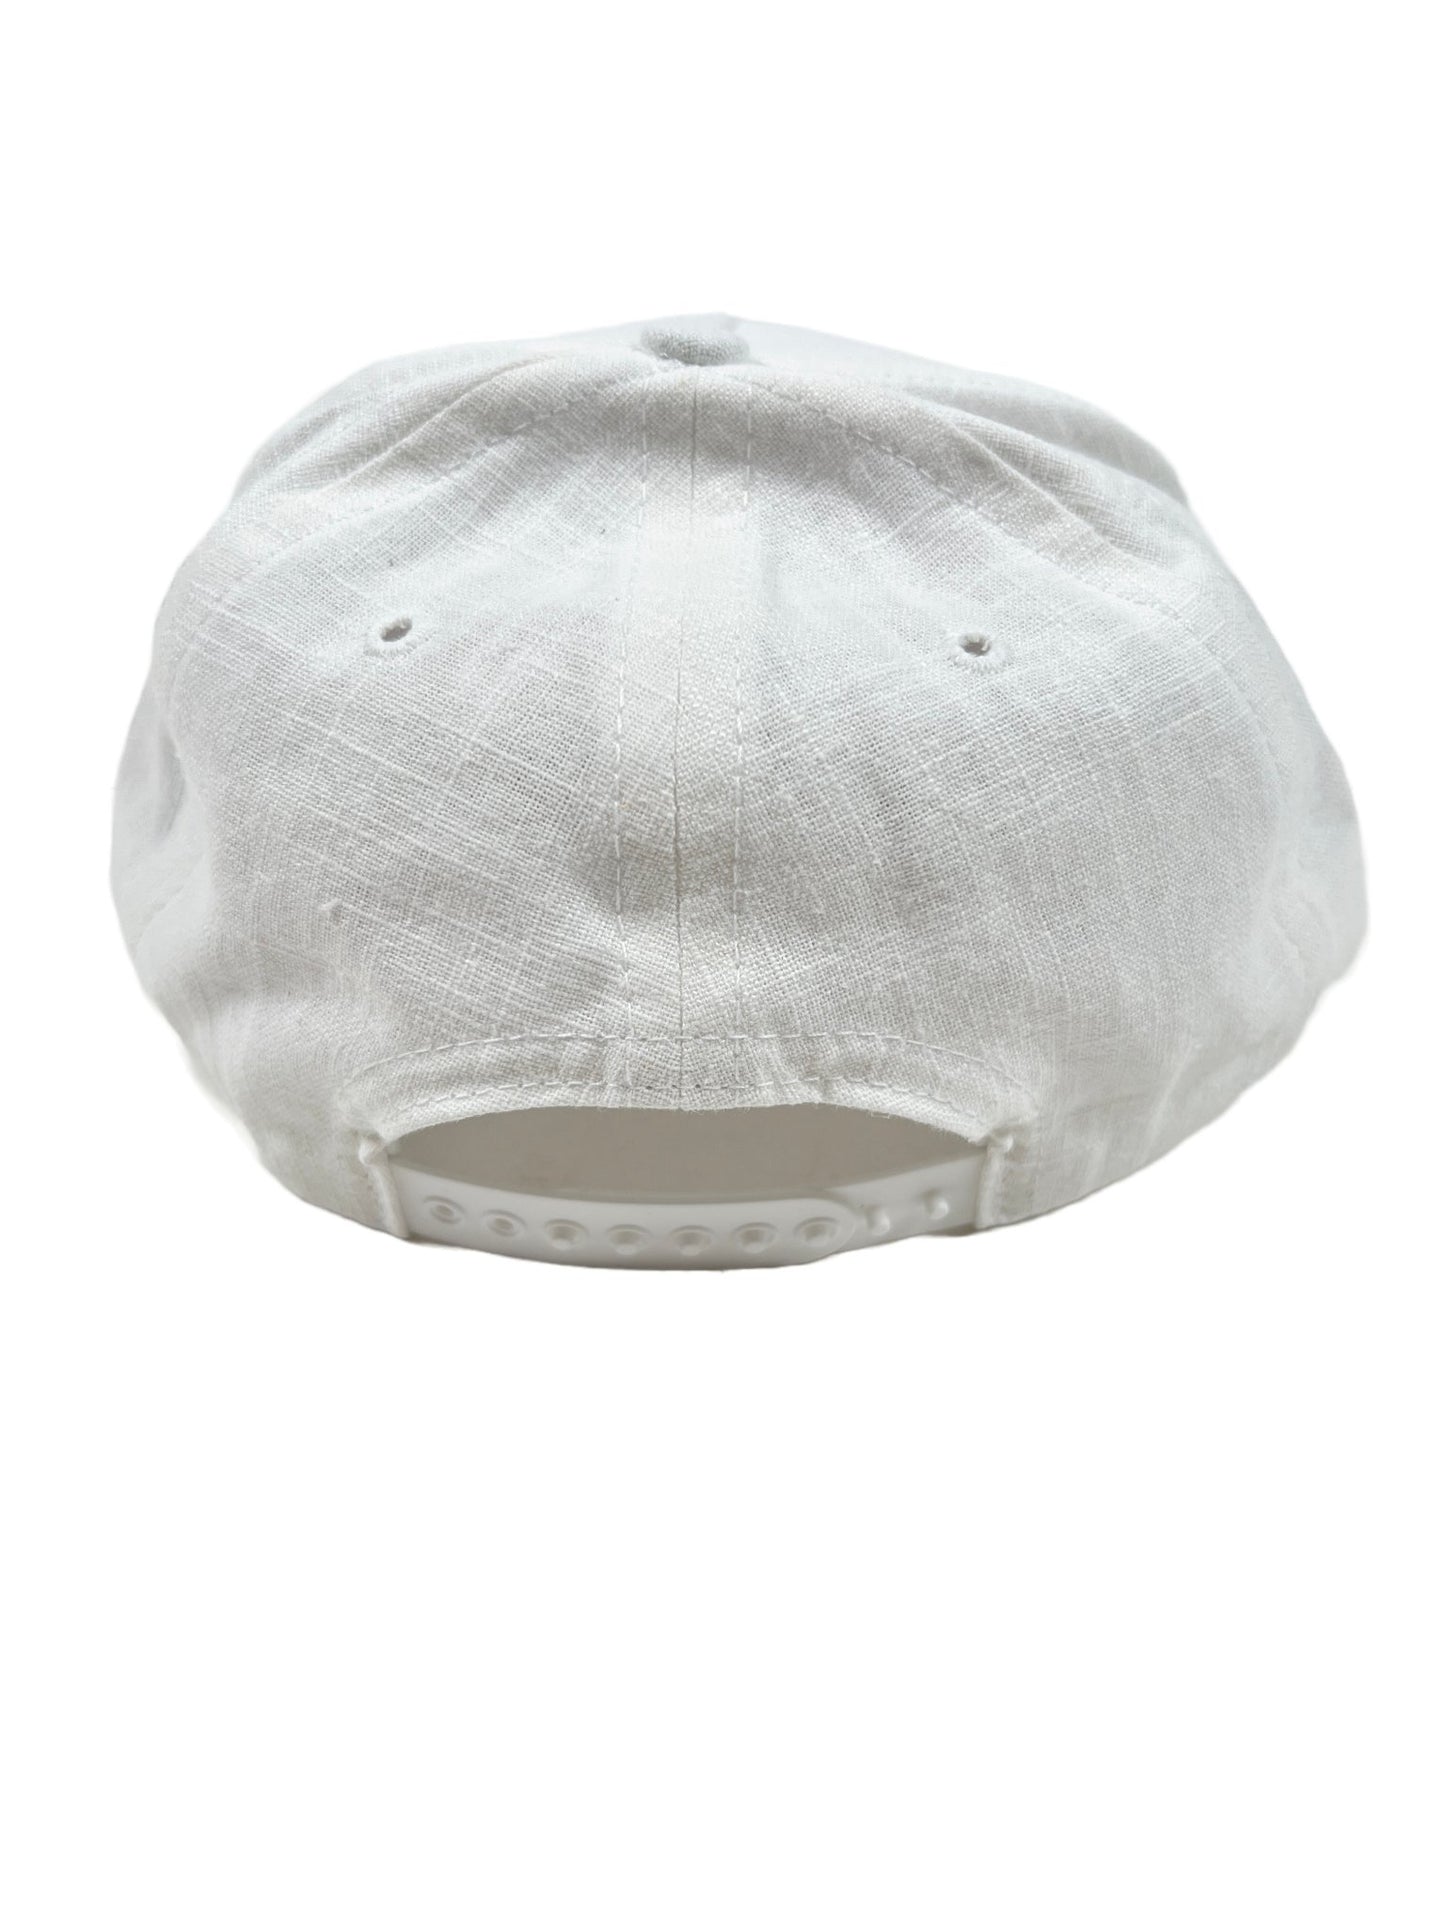 An RHUDE ROSEWOOD HAT IVORY on a white background.